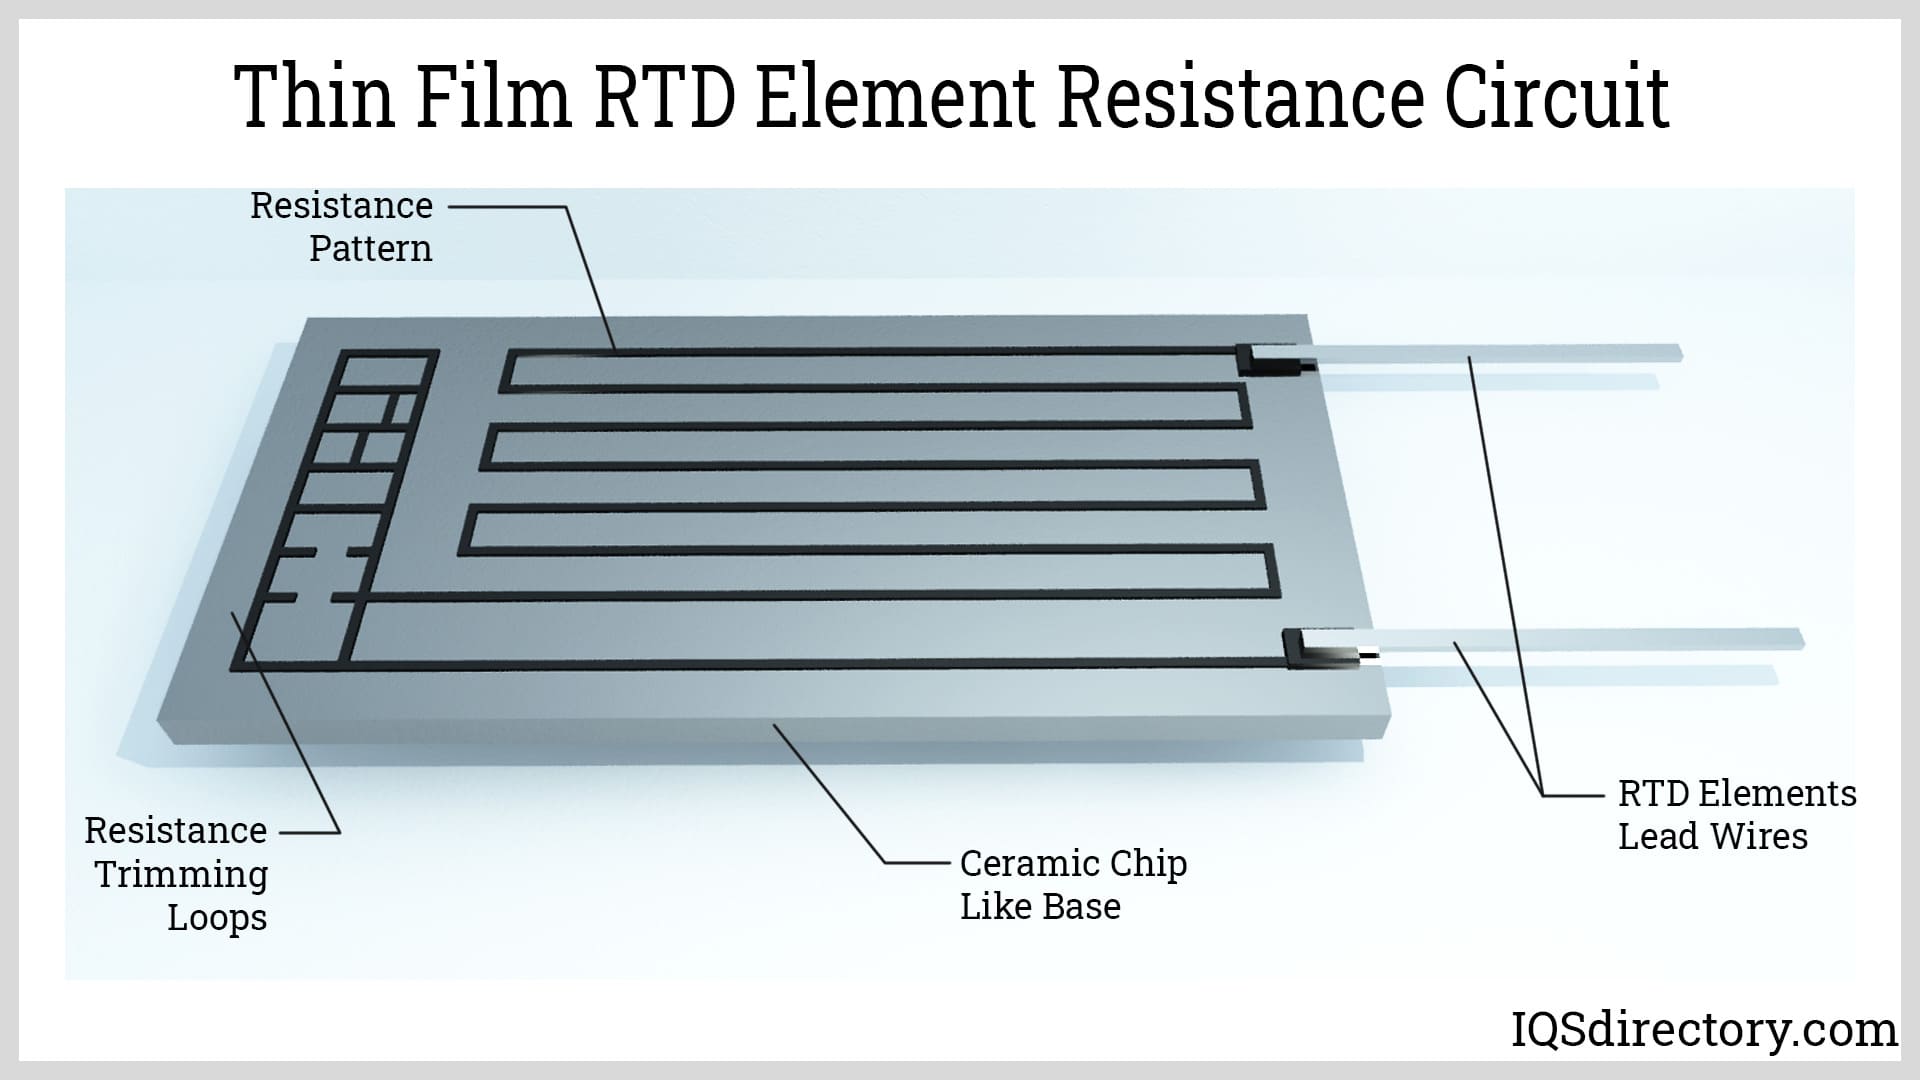 A Thin Film RTD Resistance Circuit